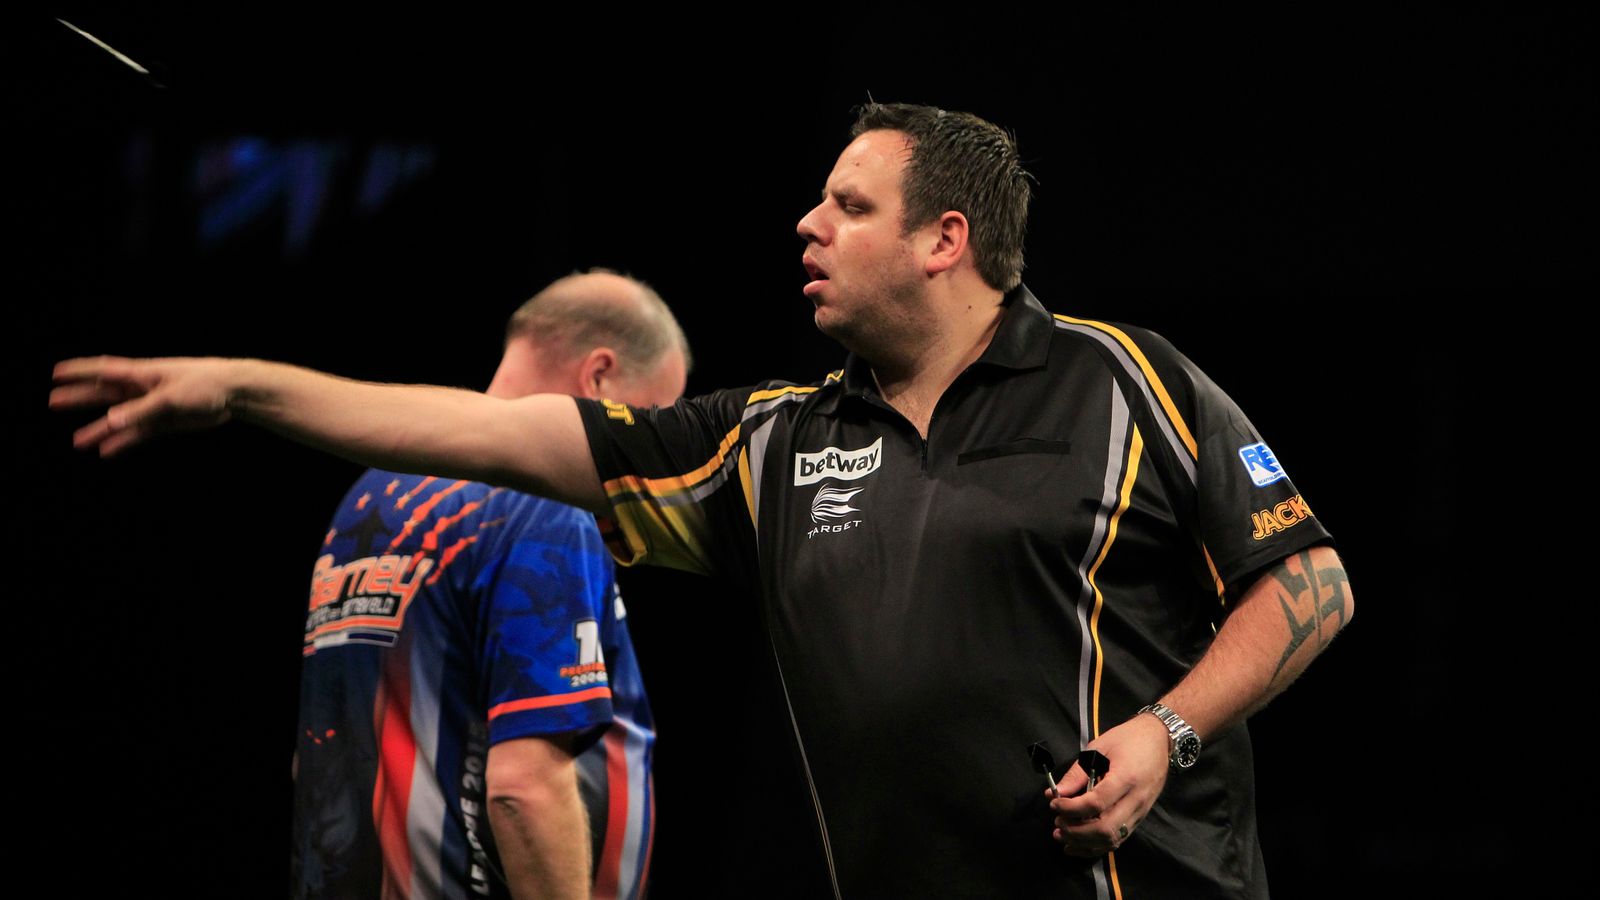 Premier League Darts: Adrian Lewis will beat Phil Taylor, says Rod ...